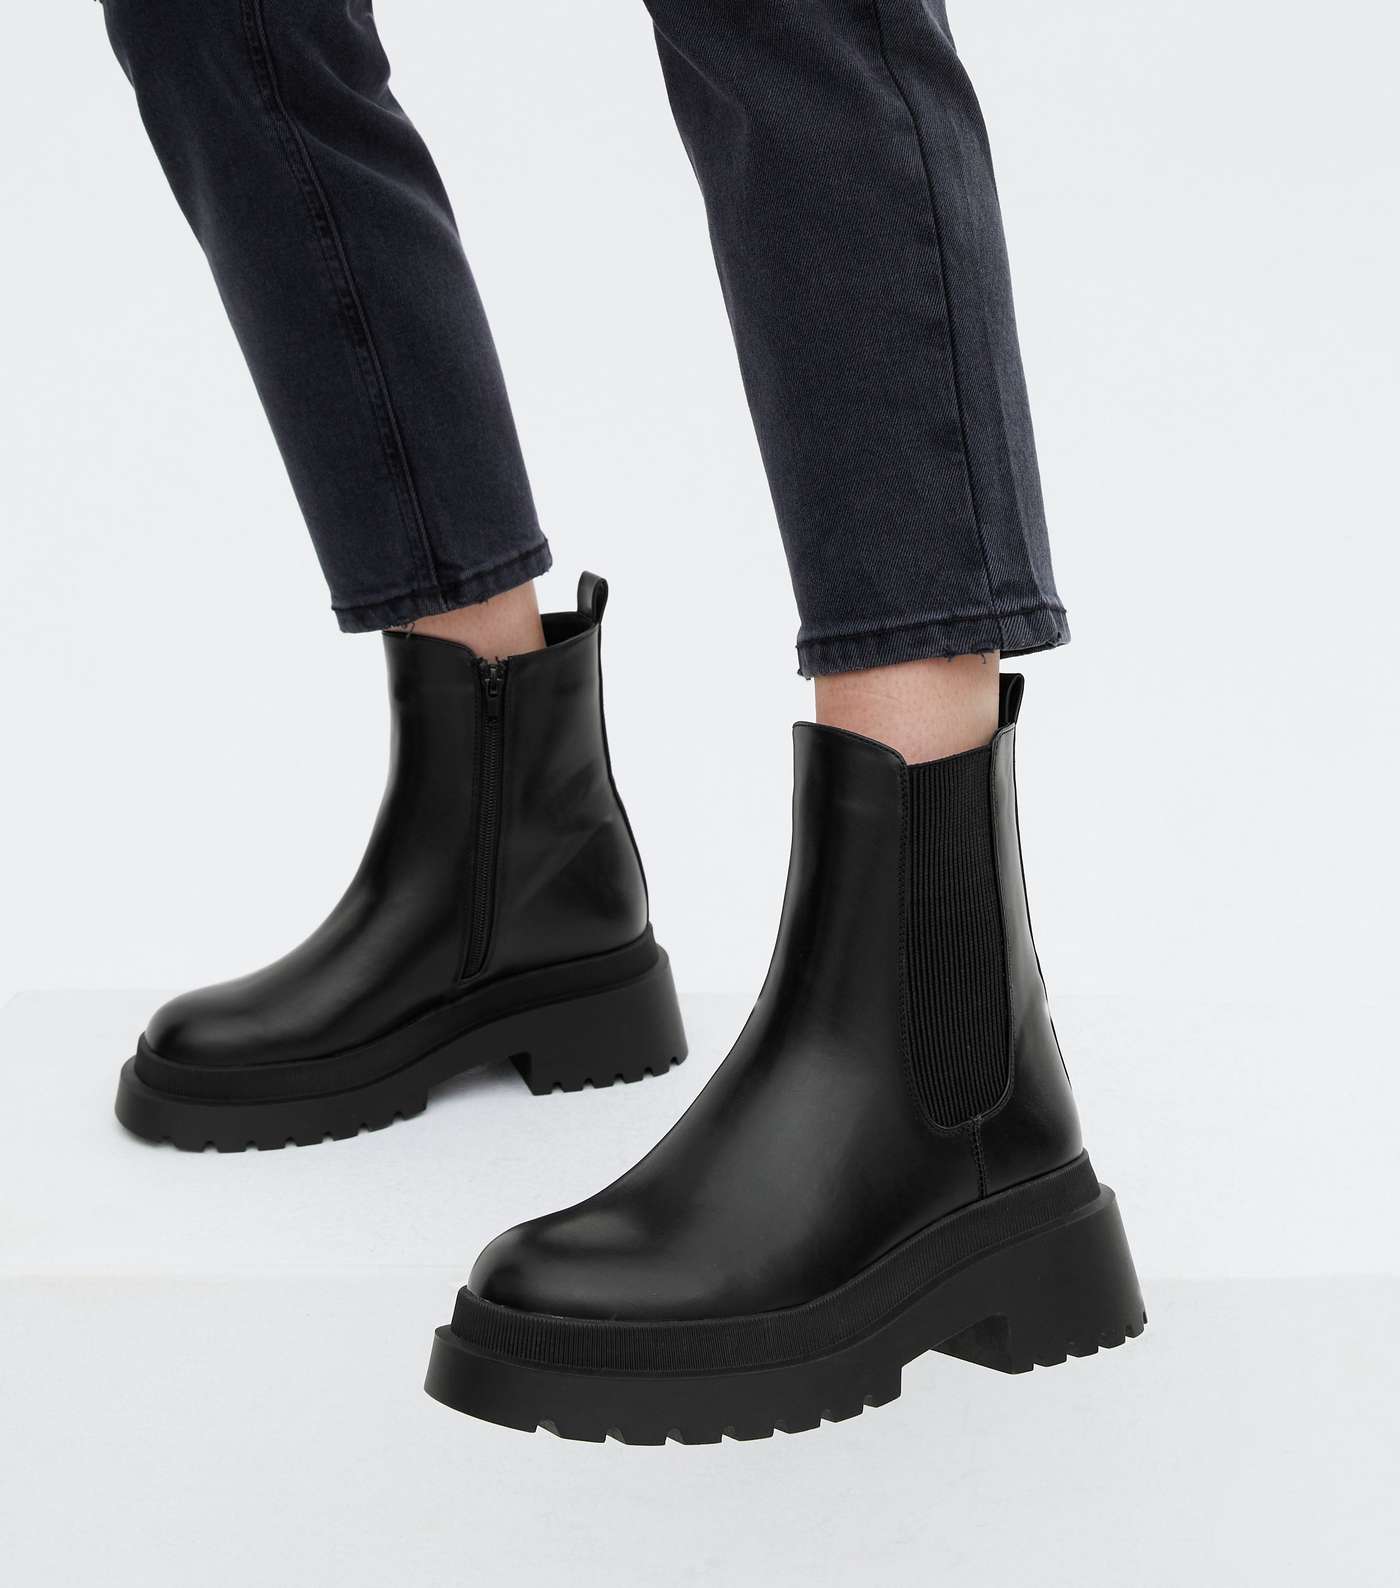 Black Leather-Look High Ankle Chelsea Boots Image 2